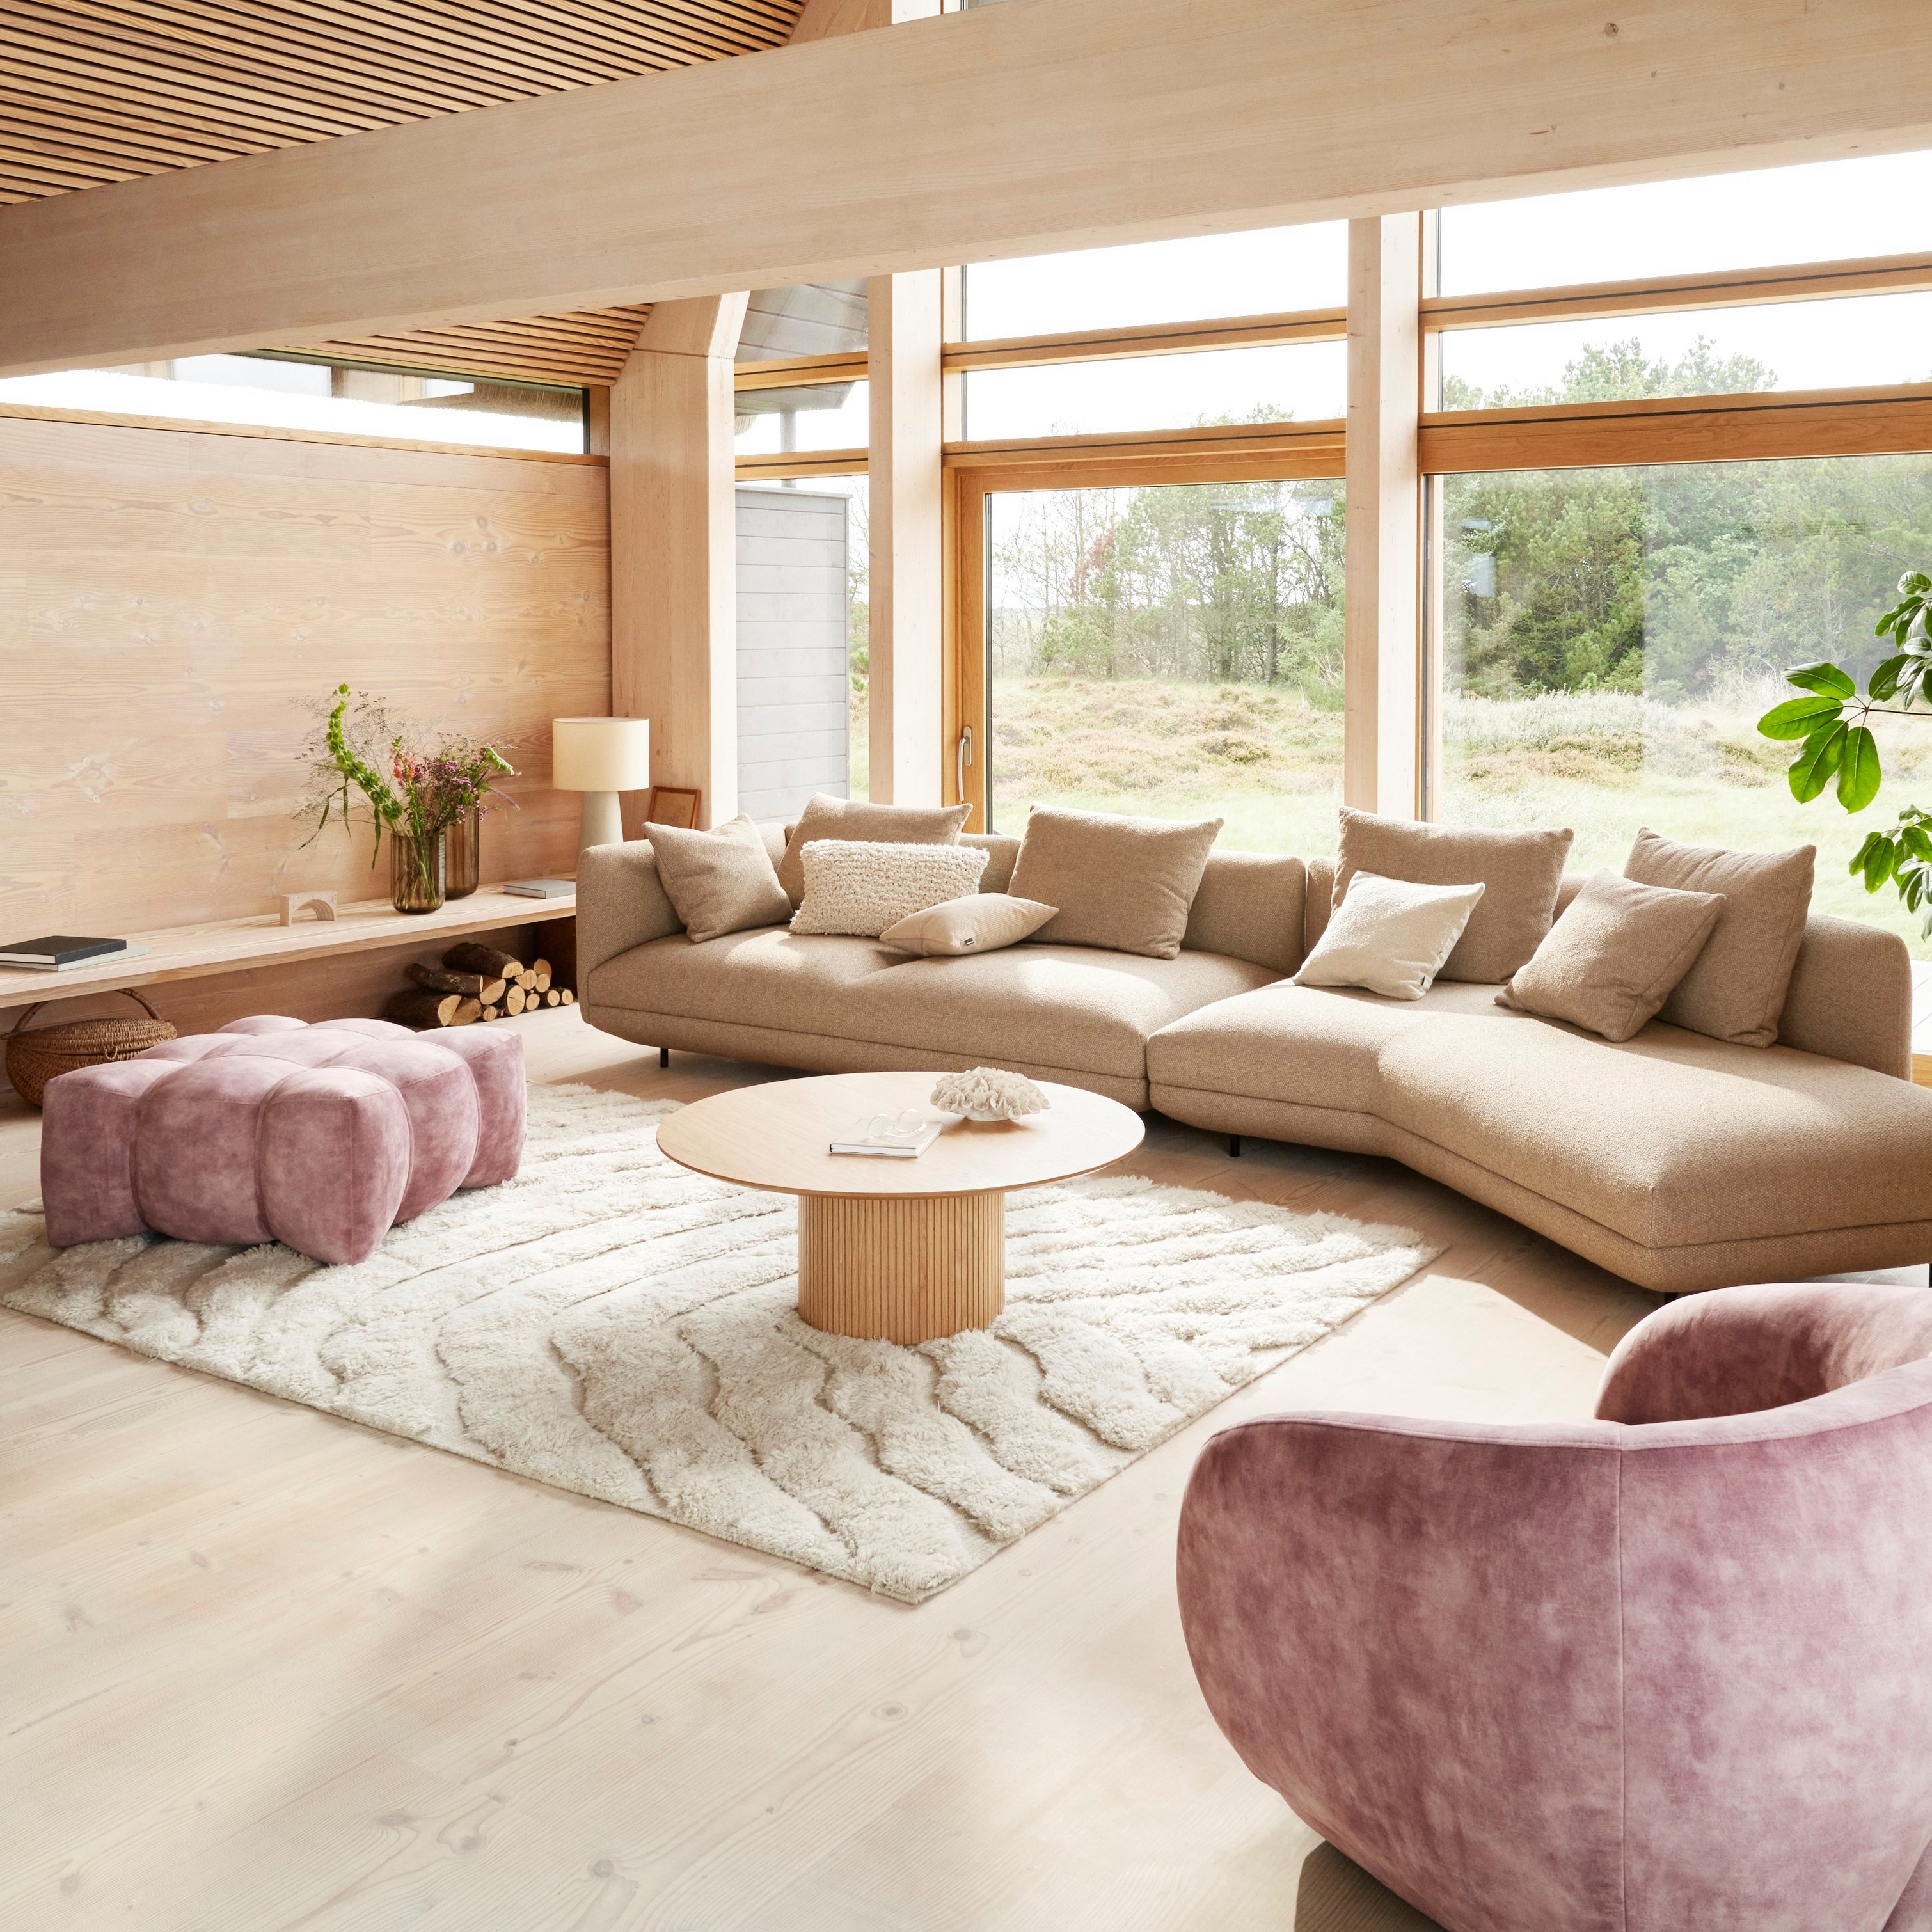 A cosy, modern living room in an A-frame home featuring the Salamanca sofa upholstered in brown Lazio fabric.